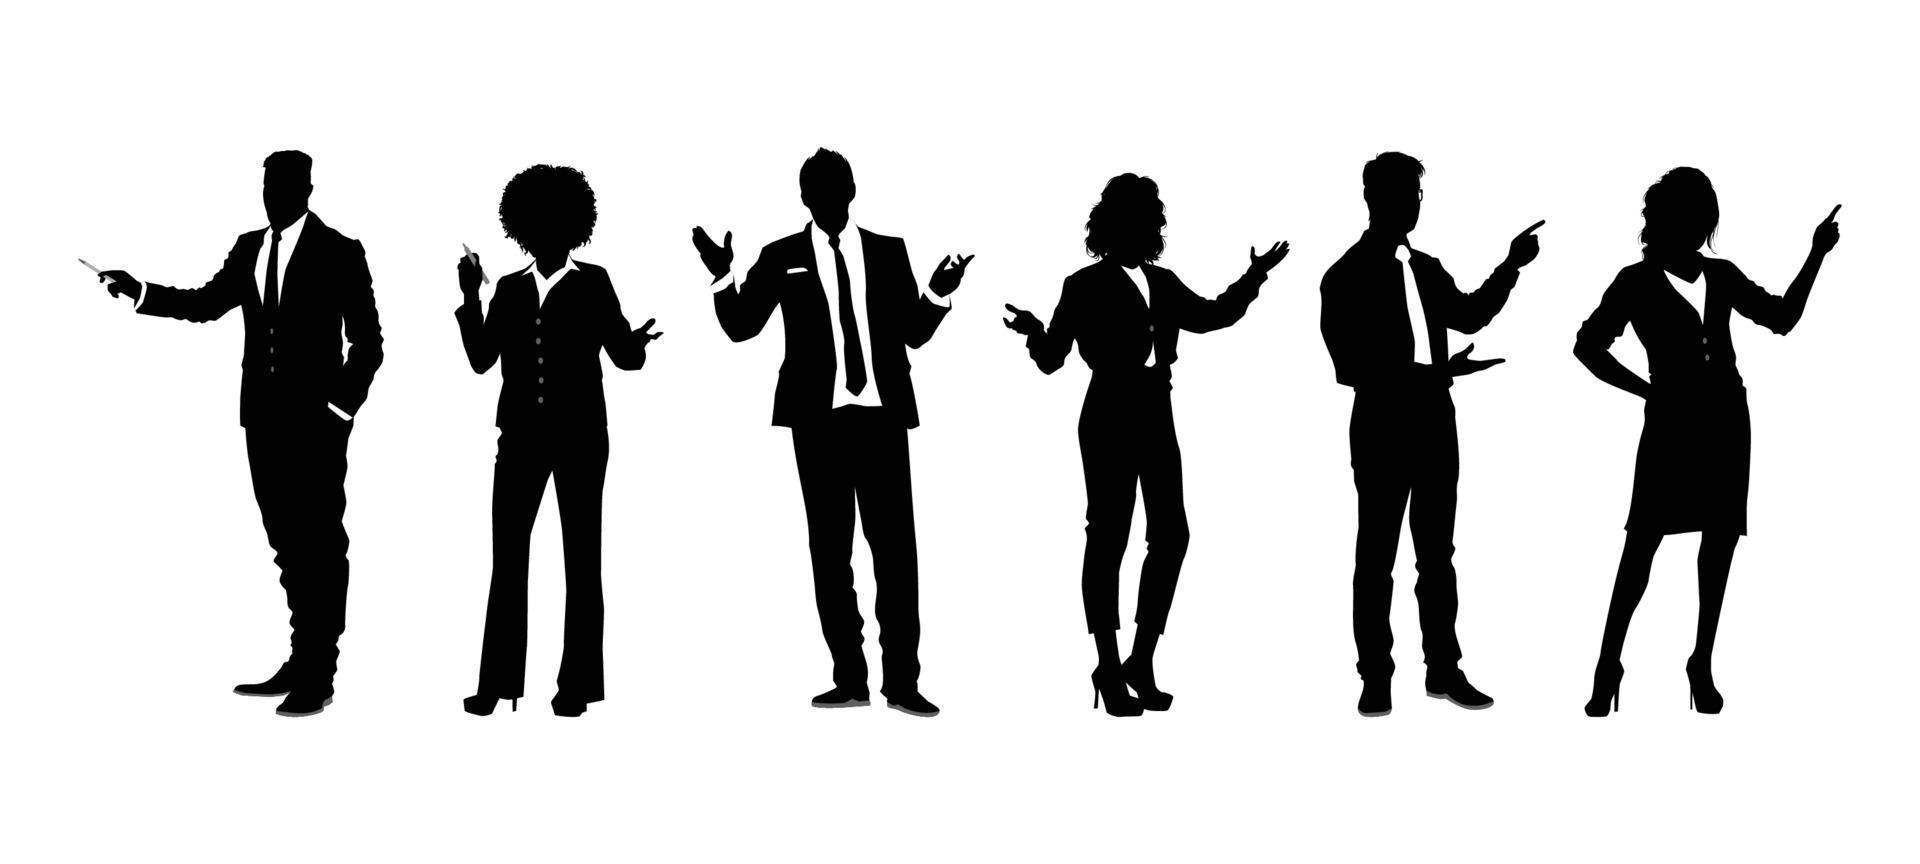 Individual Business People Presenting Silhouettes vector